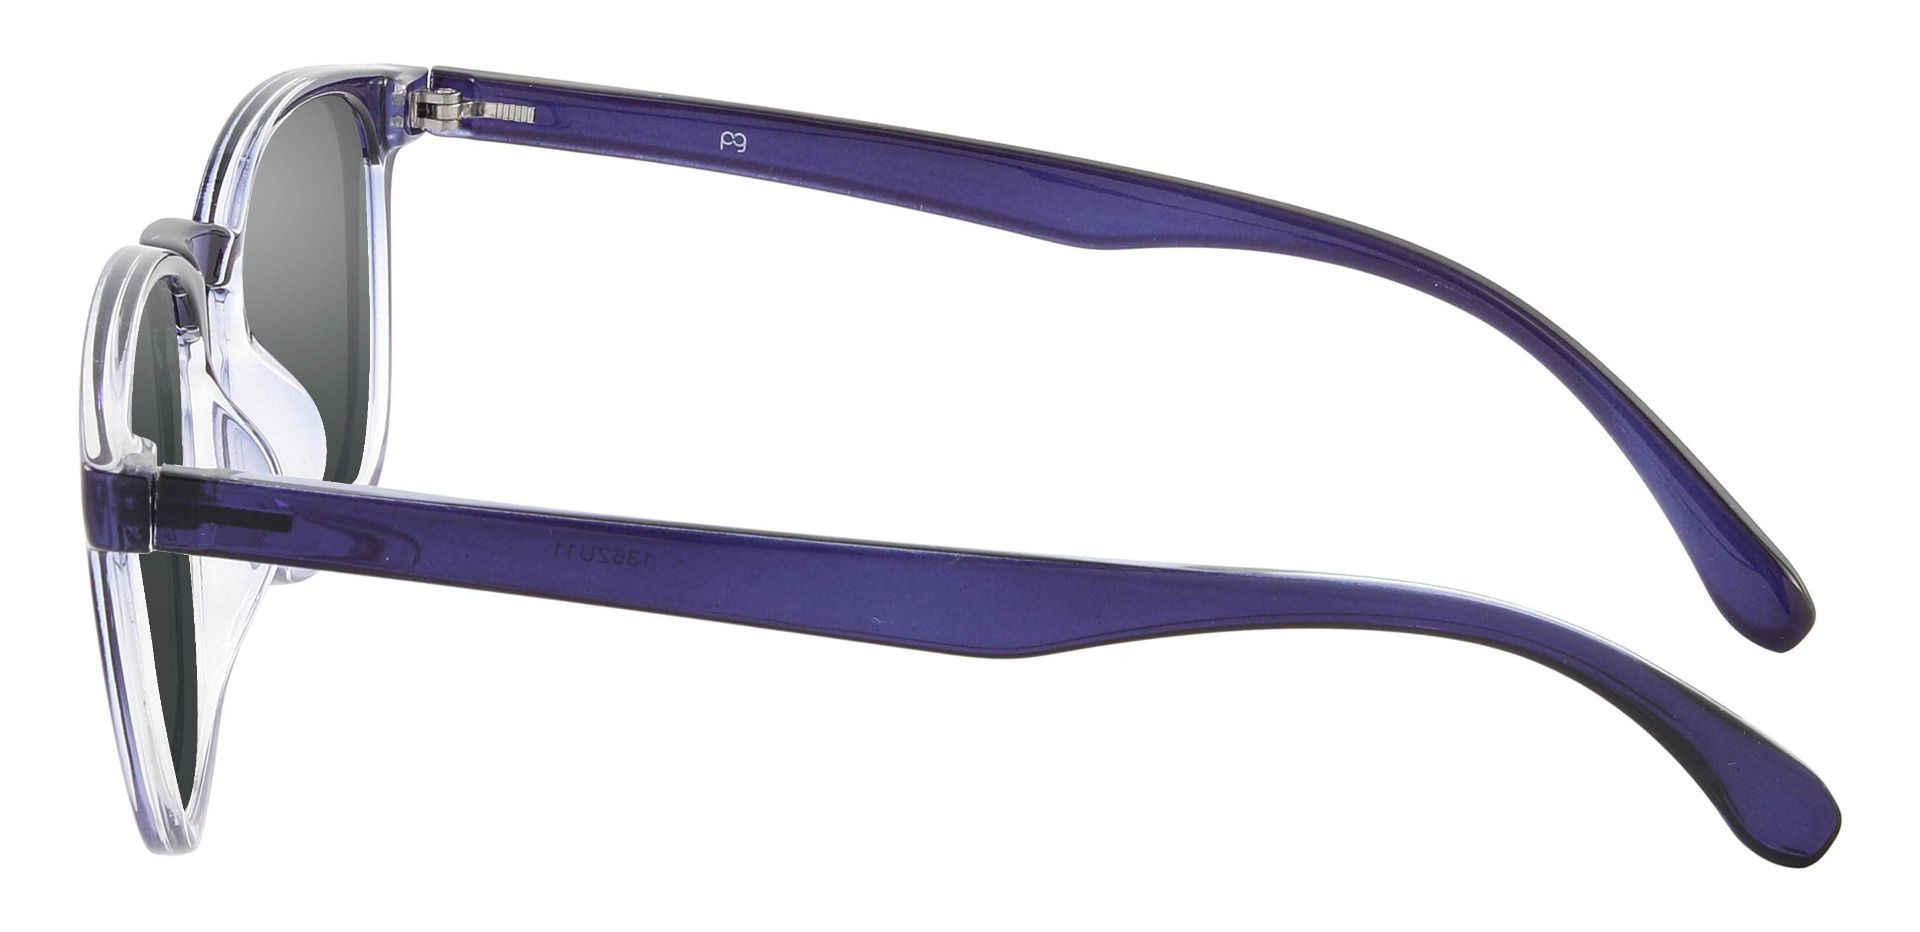 Gateway Square Non-Rx Sunglasses - Blue Frame With Gray Lenses